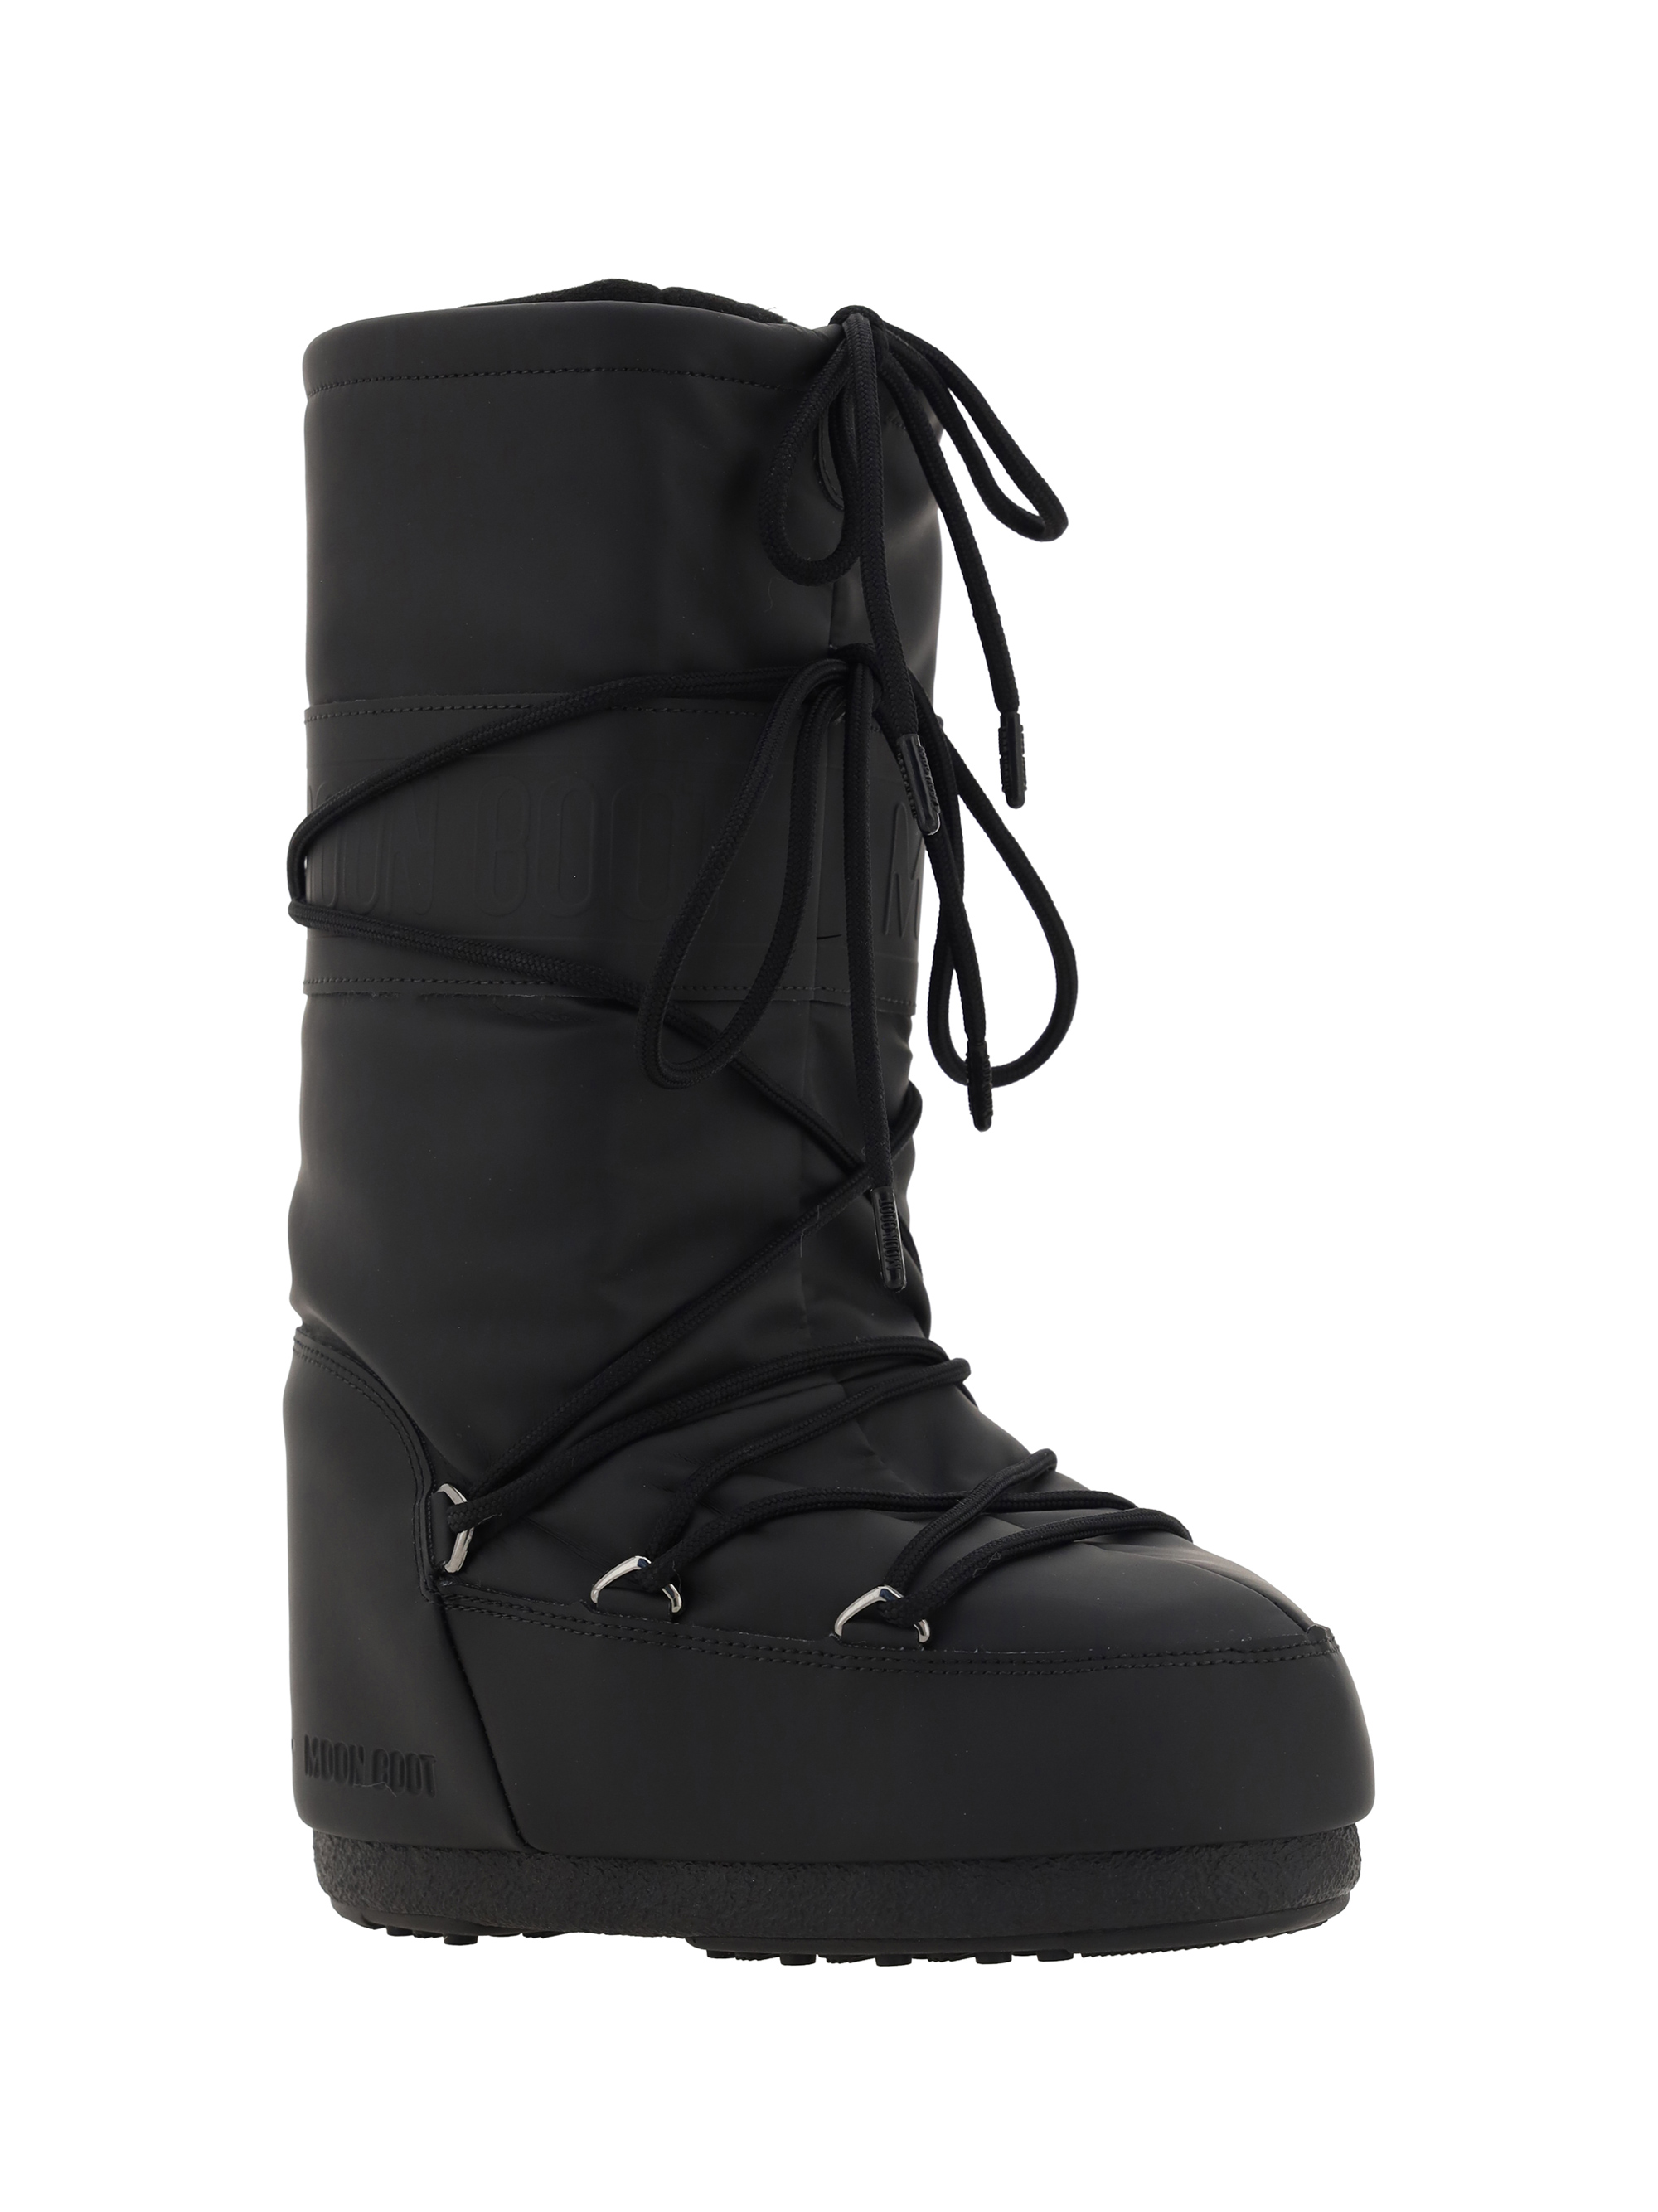 Moon Boot MOON BOOT MID NYLON WP Black - Fast delivery